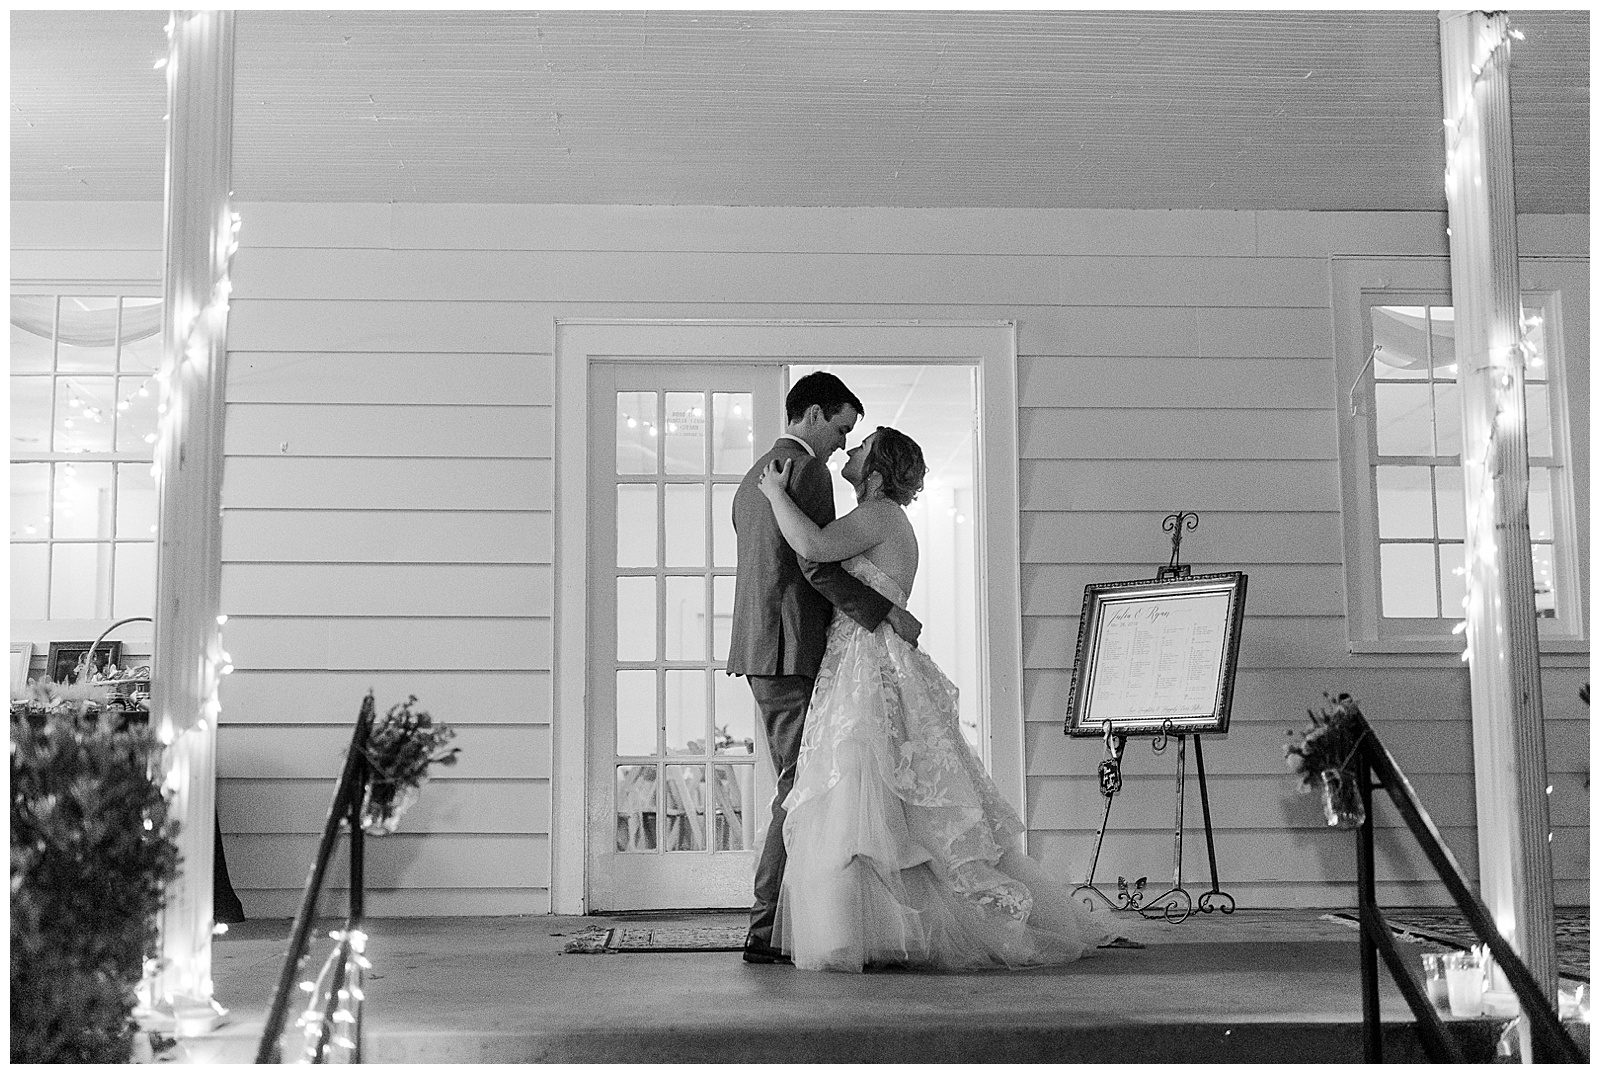 Bride and groom share a special moment after Outdoorsy Summer Wedding at North Carolina Lakehouse in the Mountains | check out the full wedding at KevynDixonPhoto.com